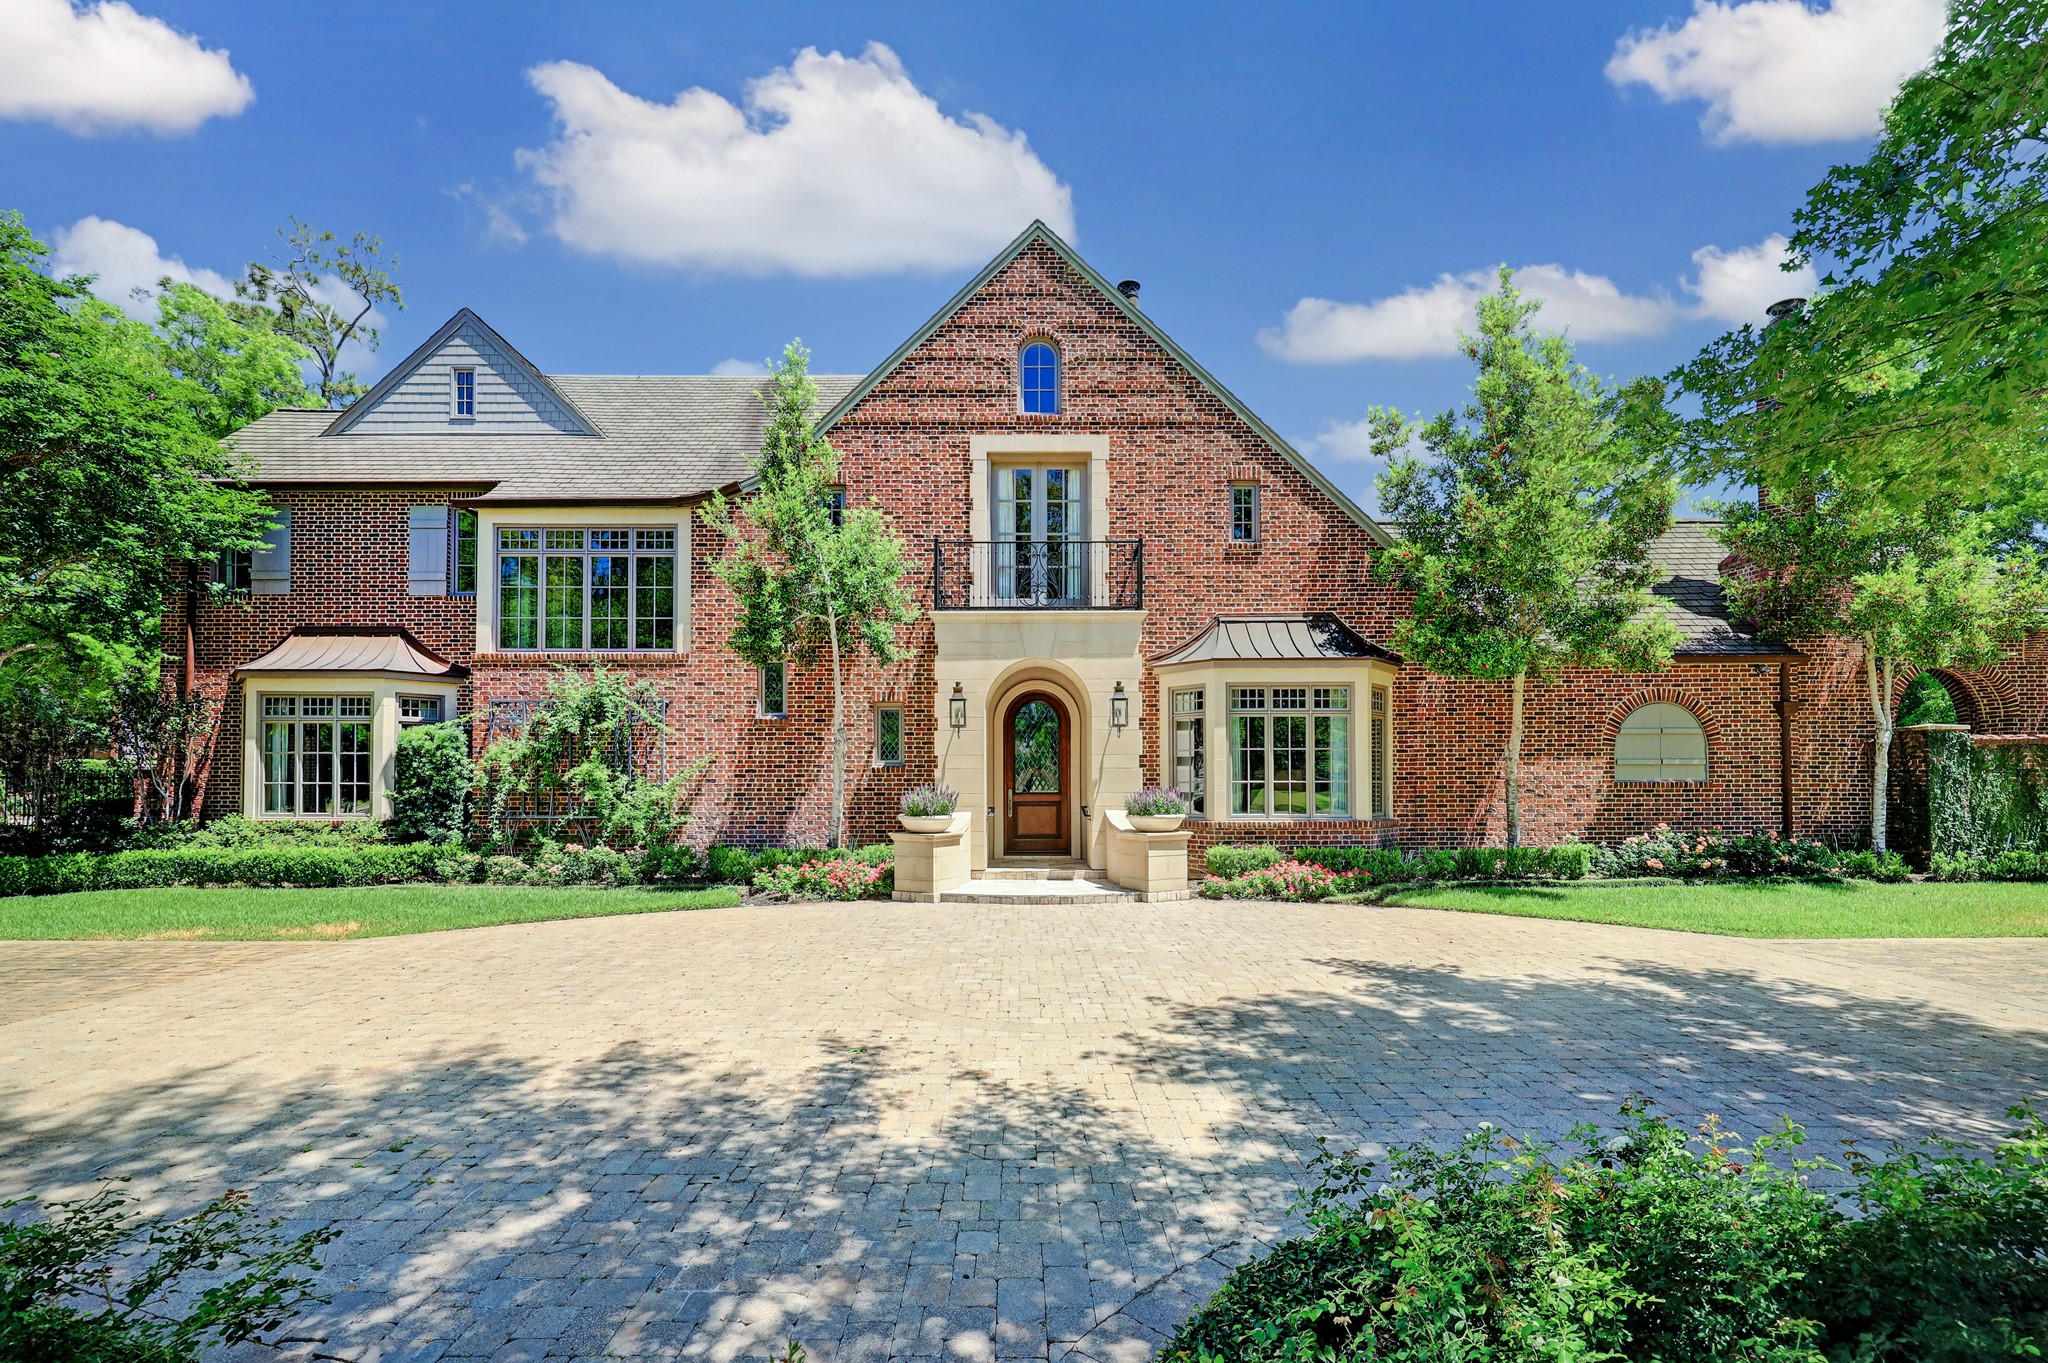 Welcome to the beautiful estate of 11320 Green Vale Dr. Located in the heart of Piney Point Village.